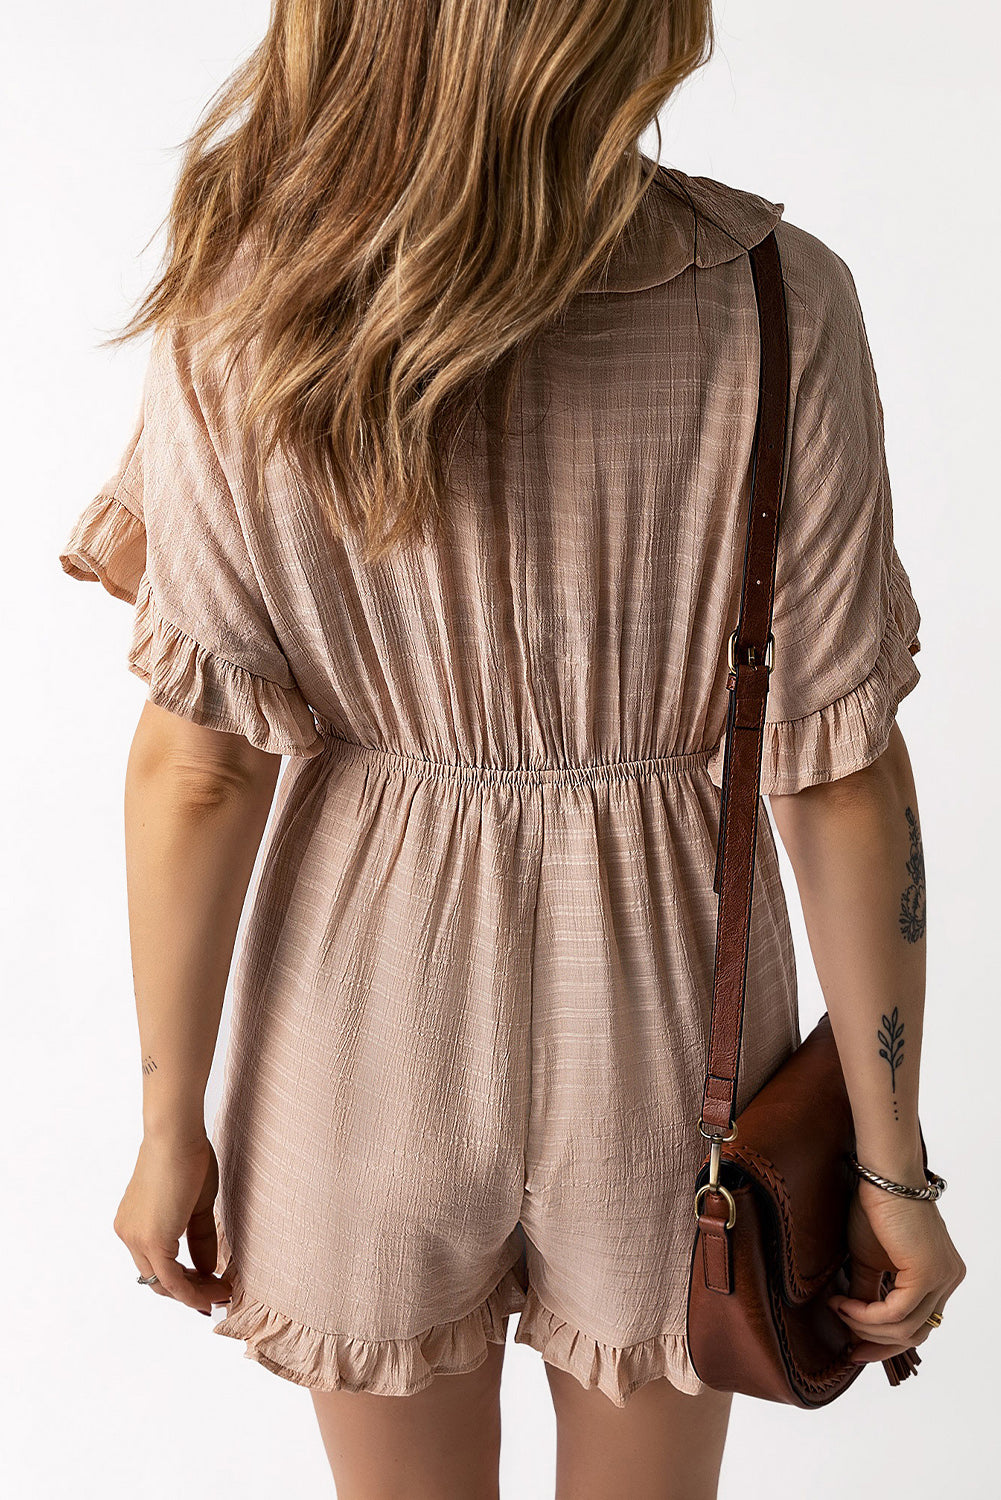 Striped Tie Detail Ruffled Romper with Pockets - Ryzela